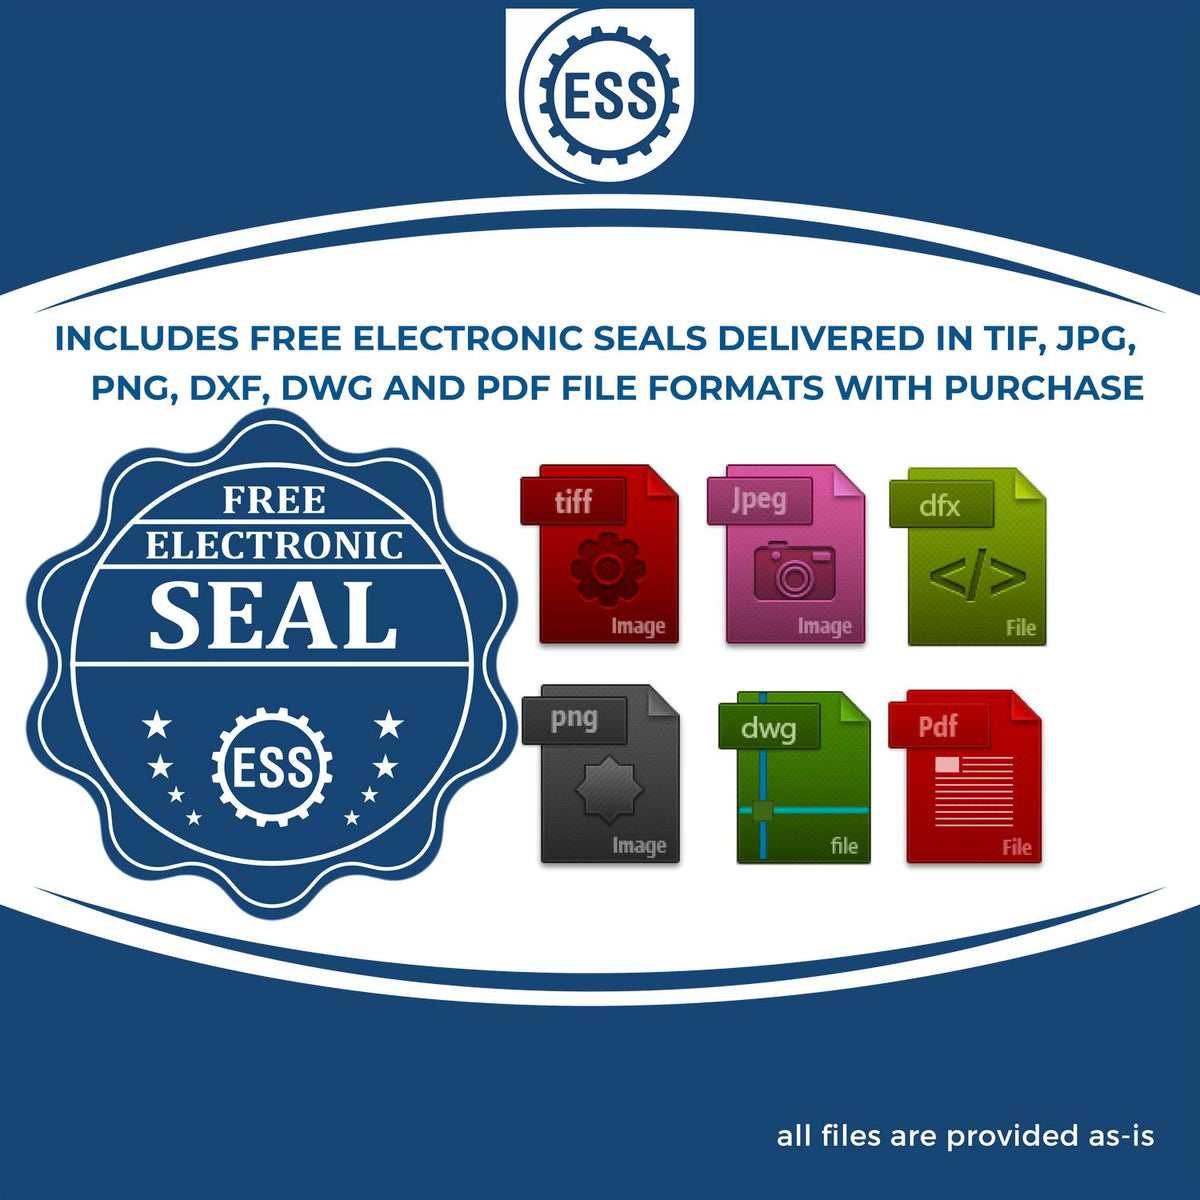 An infographic for the free electronic seal for the Gift Pennsylvania Landscape Architect Seal illustrating the different file type icons such as DXF, DWG, TIF, JPG and PNG.